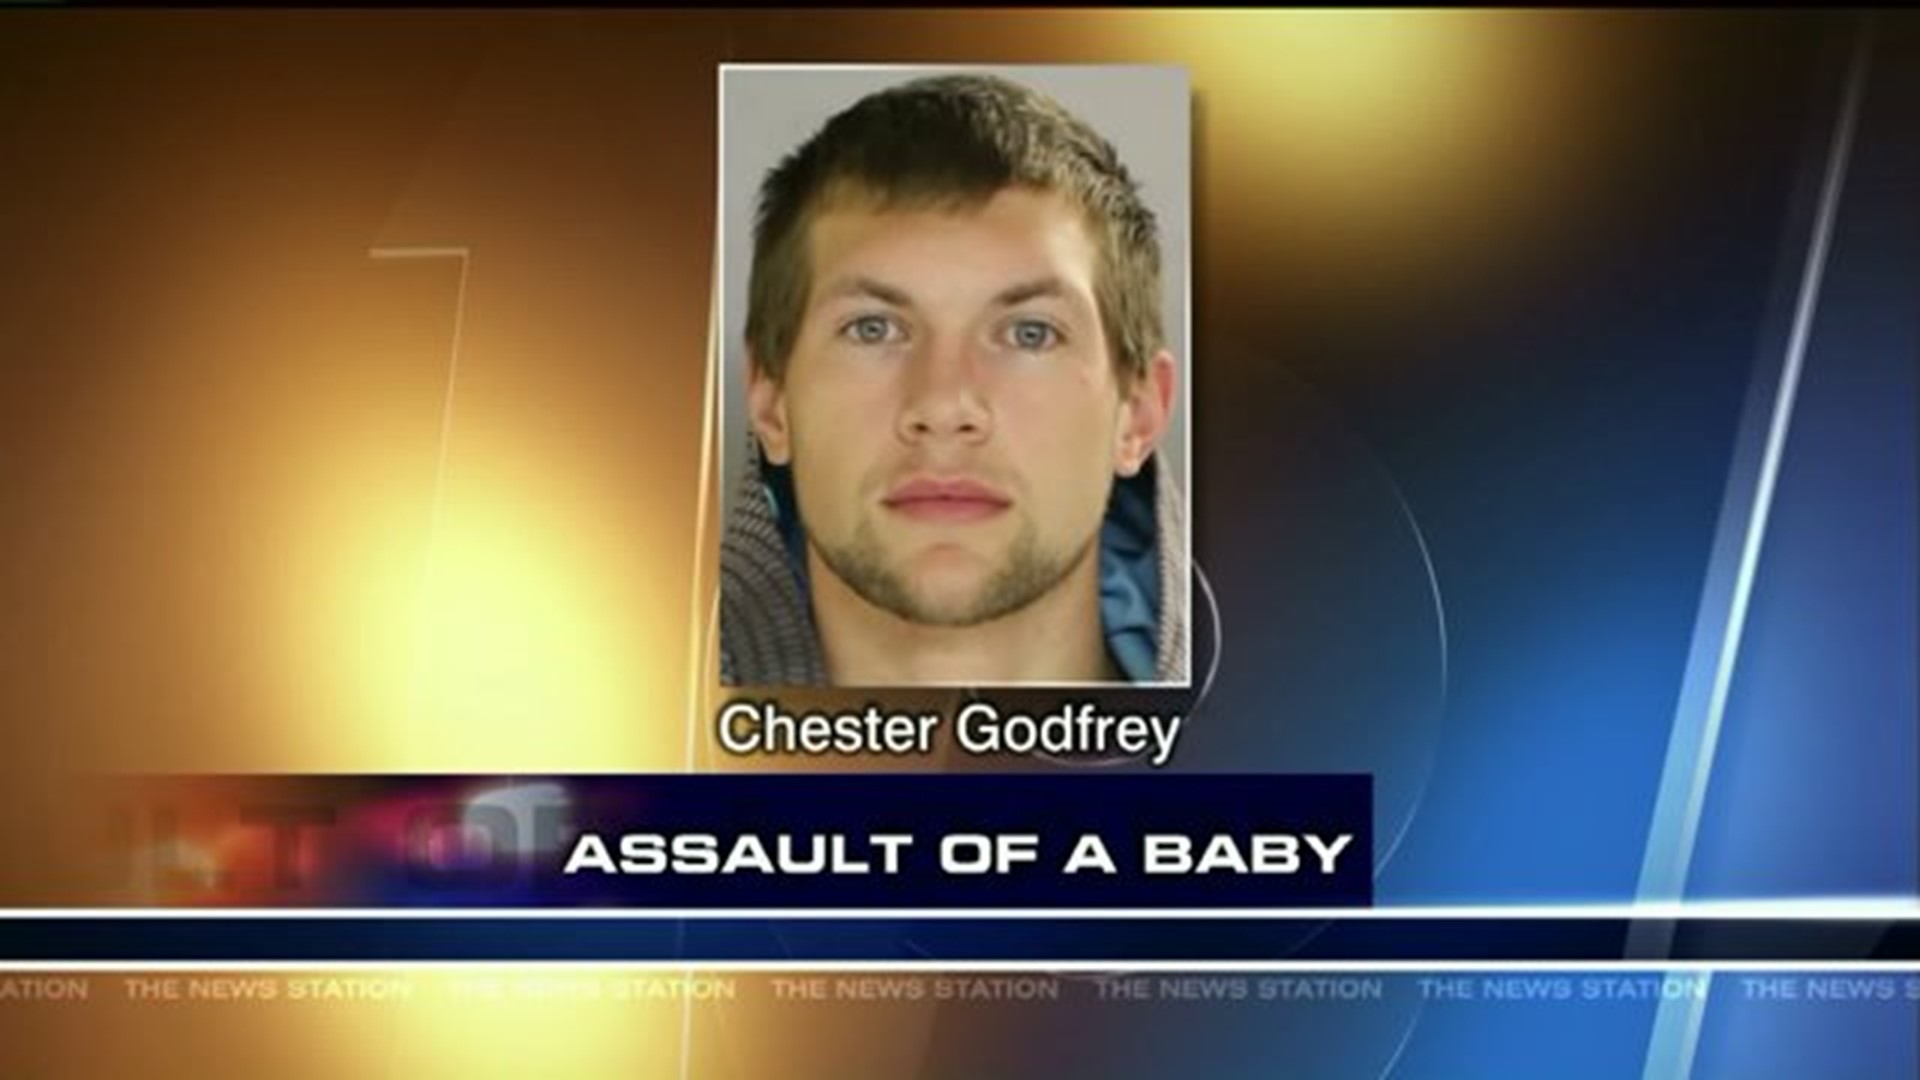 Man Charged with Assaulting Baby